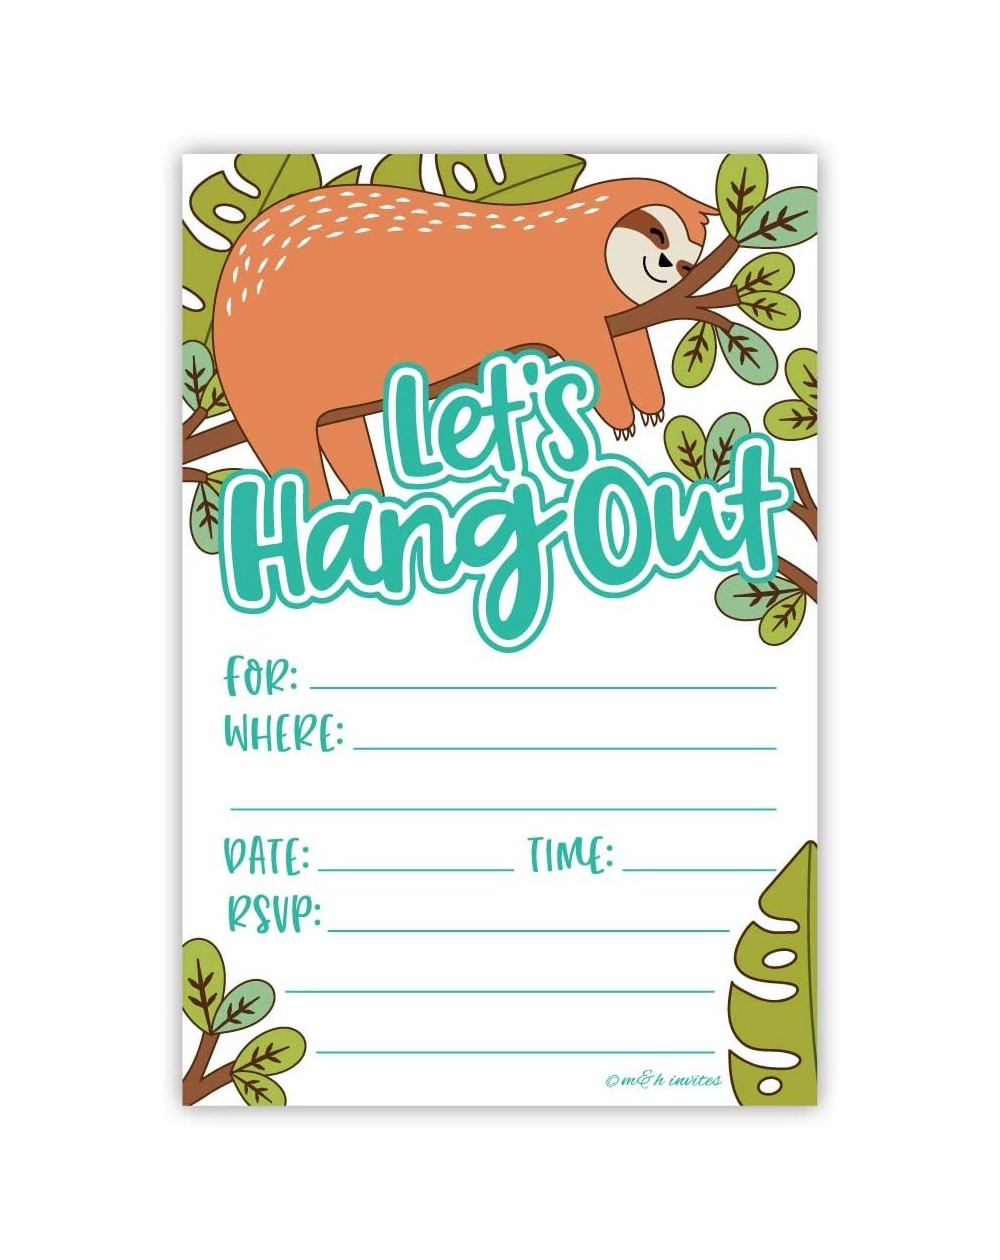 Invitations Sloth Birthday Invitations (20 Count) with Envelopes - Let's Hang Out - CX195D5W4RA $10.96